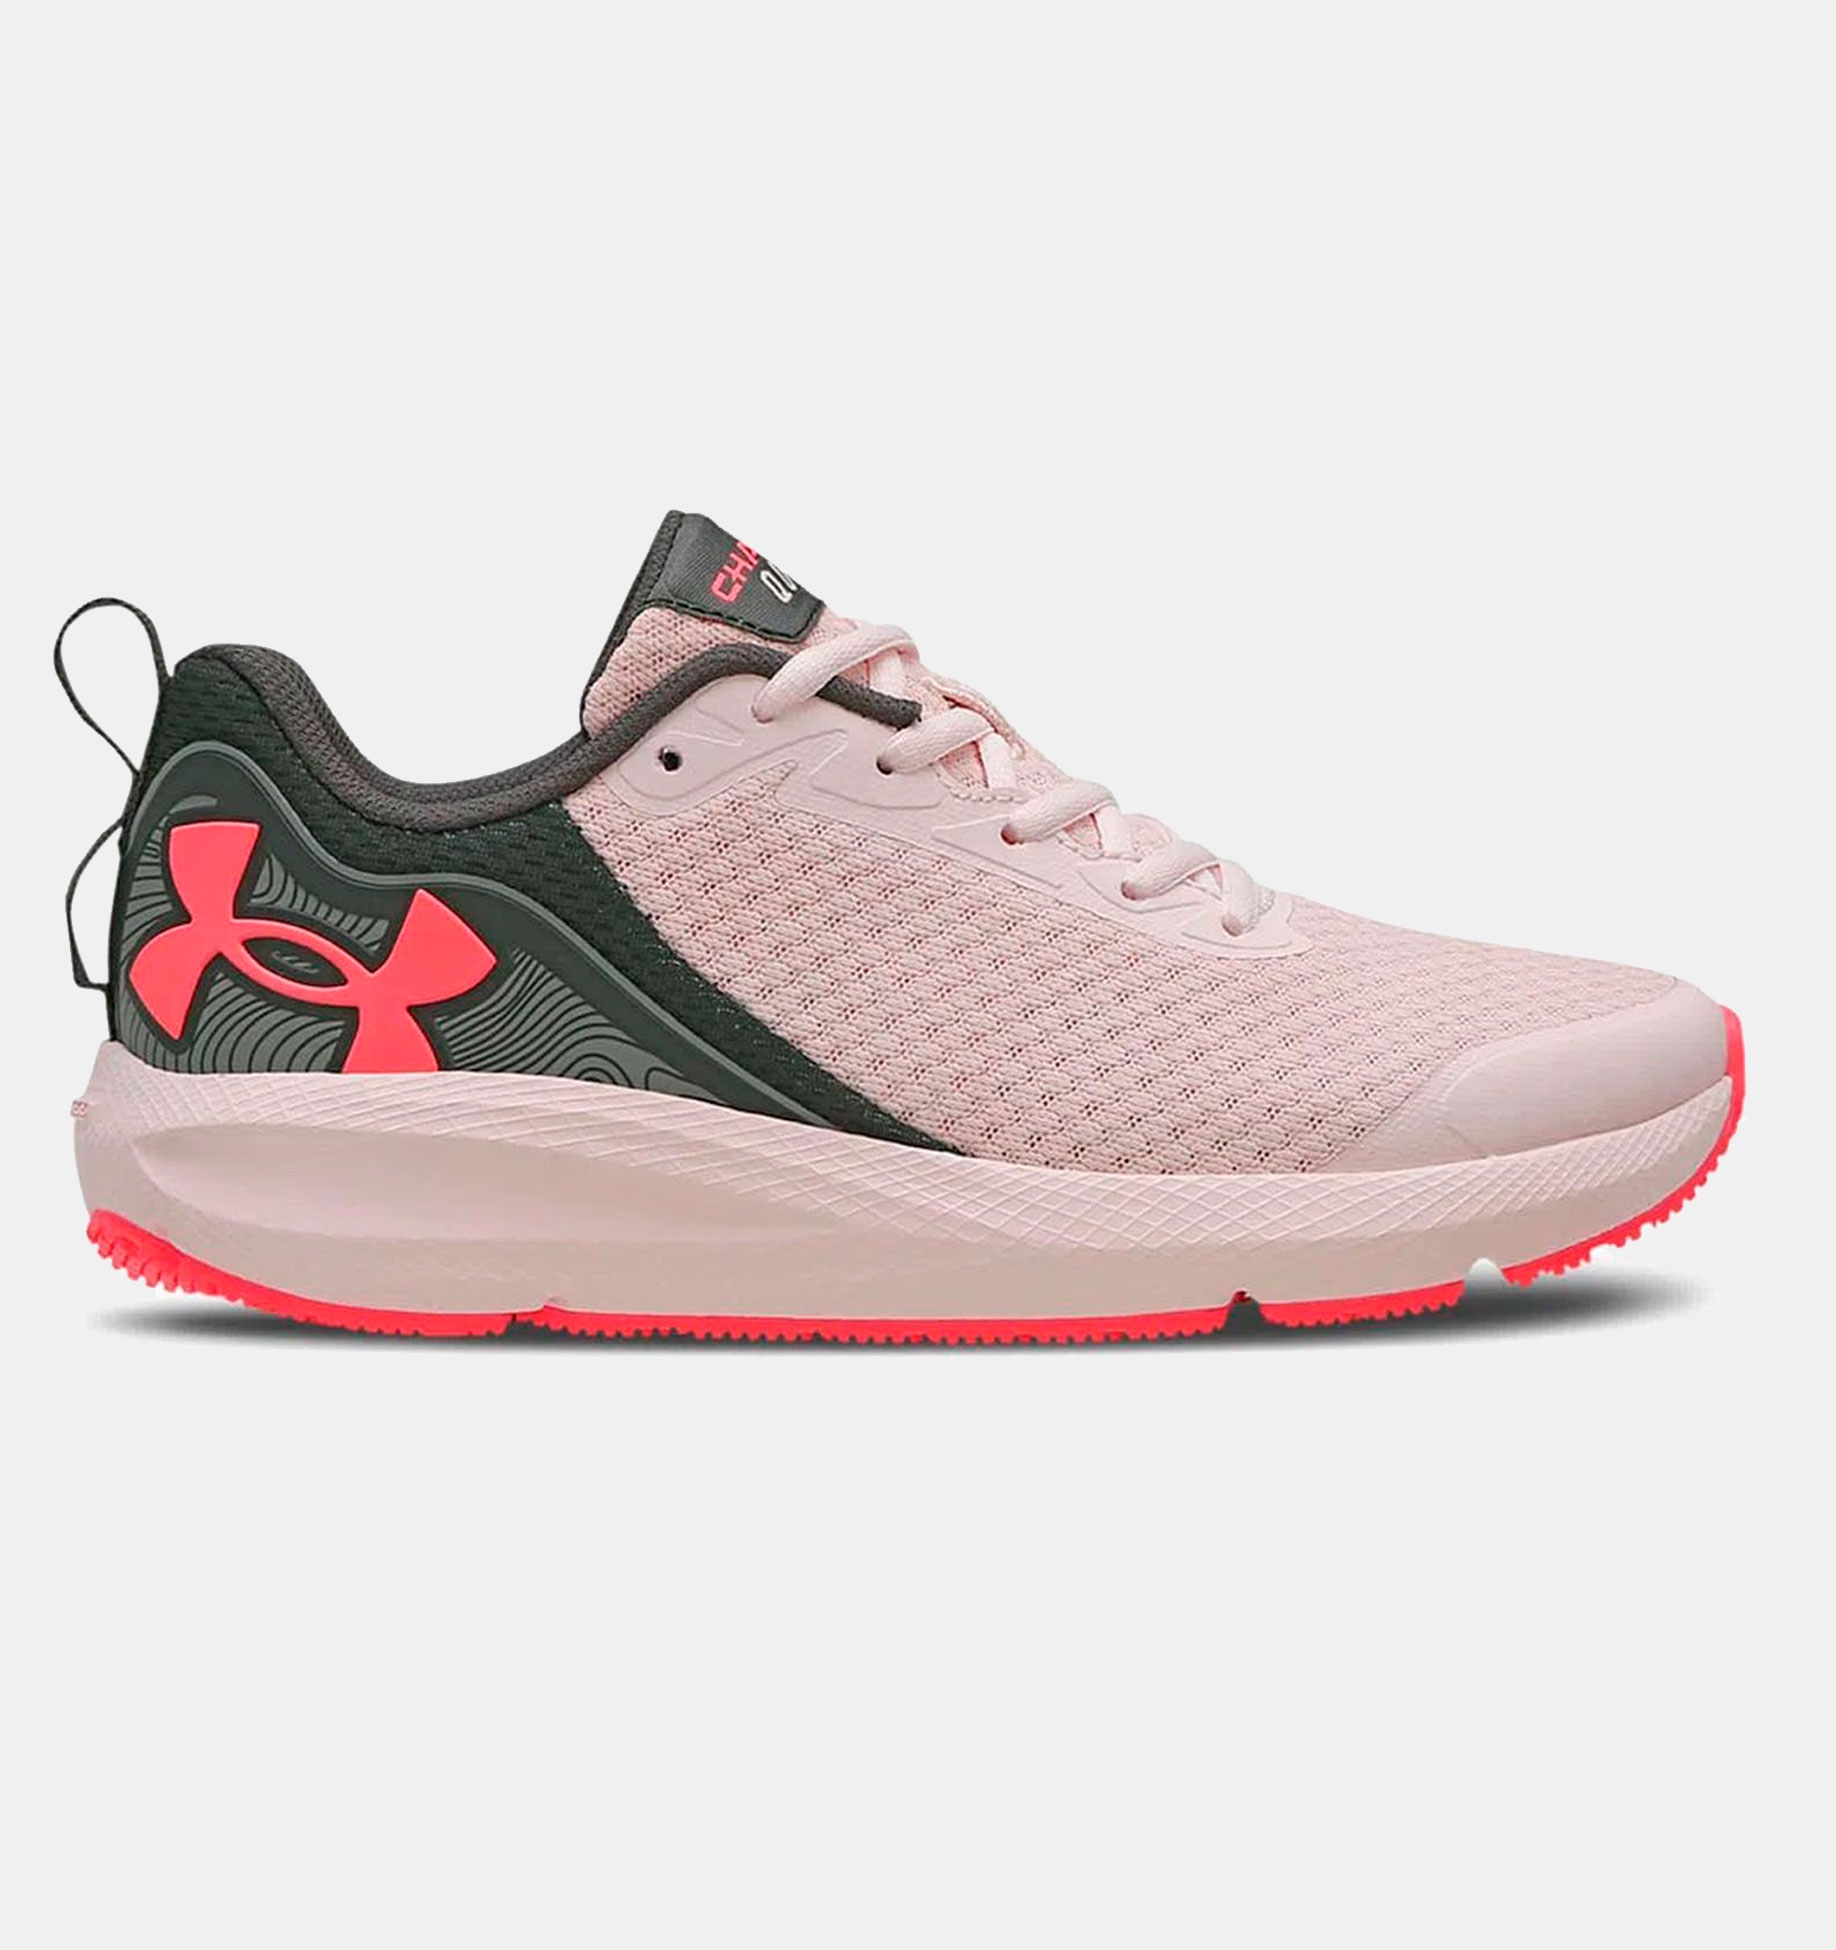 https://www.underarmour.com.ar/on/demandware.static/-/Sites-underarmour_staging/default/dw9b0f2381/new_images/3025924/195253000577/195253000577-1.jpeg